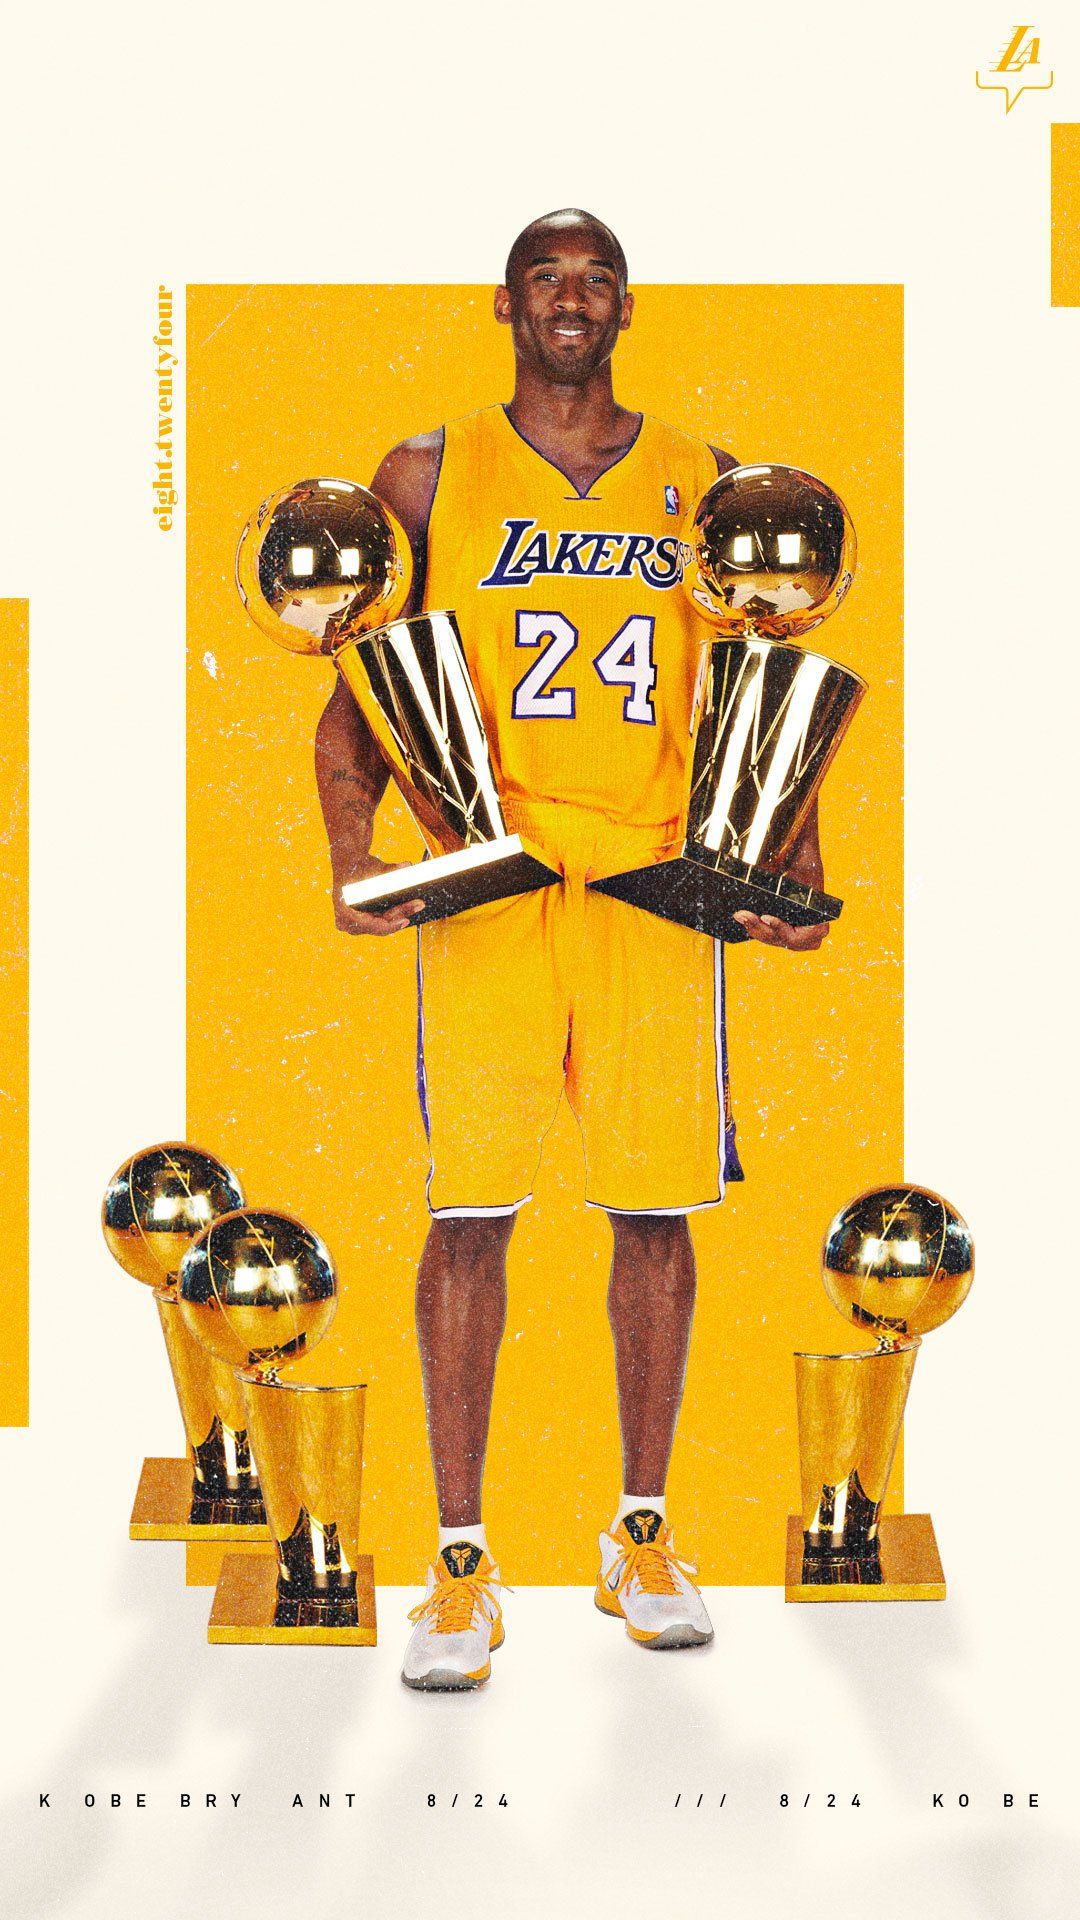 Los Angeles Lakers on Twitter .twitter.com